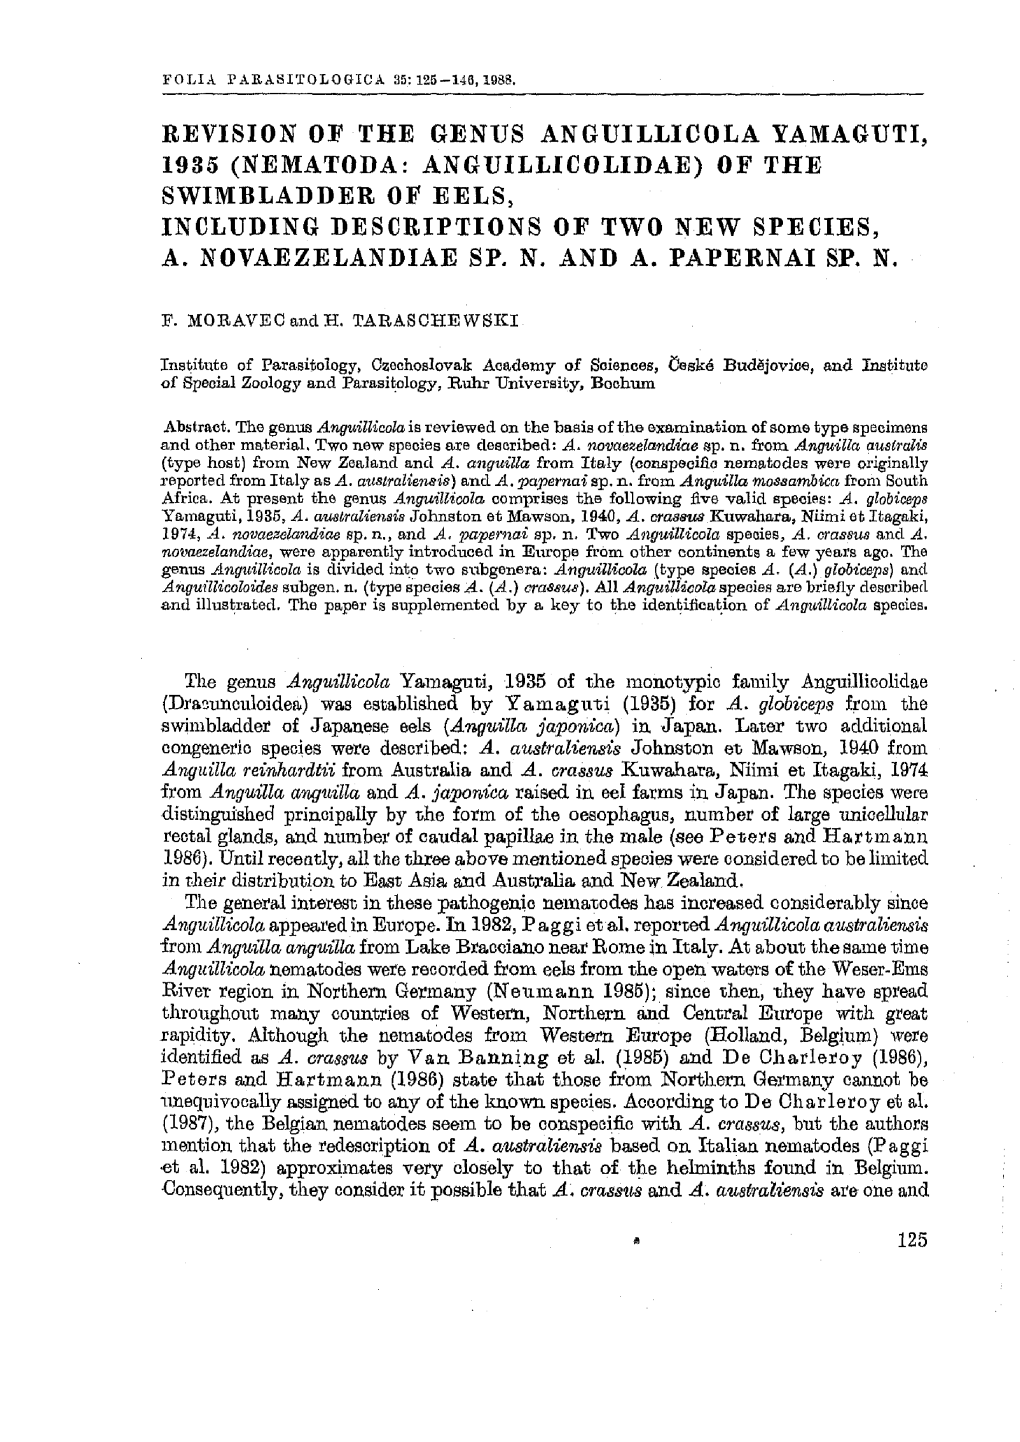 Revision of the Genus Anguillicola Yamaguti, 1935 (Nematoda: Anguillicolidae) of the Swimbladder of Eels) Including Descriptions of Two New Species, A